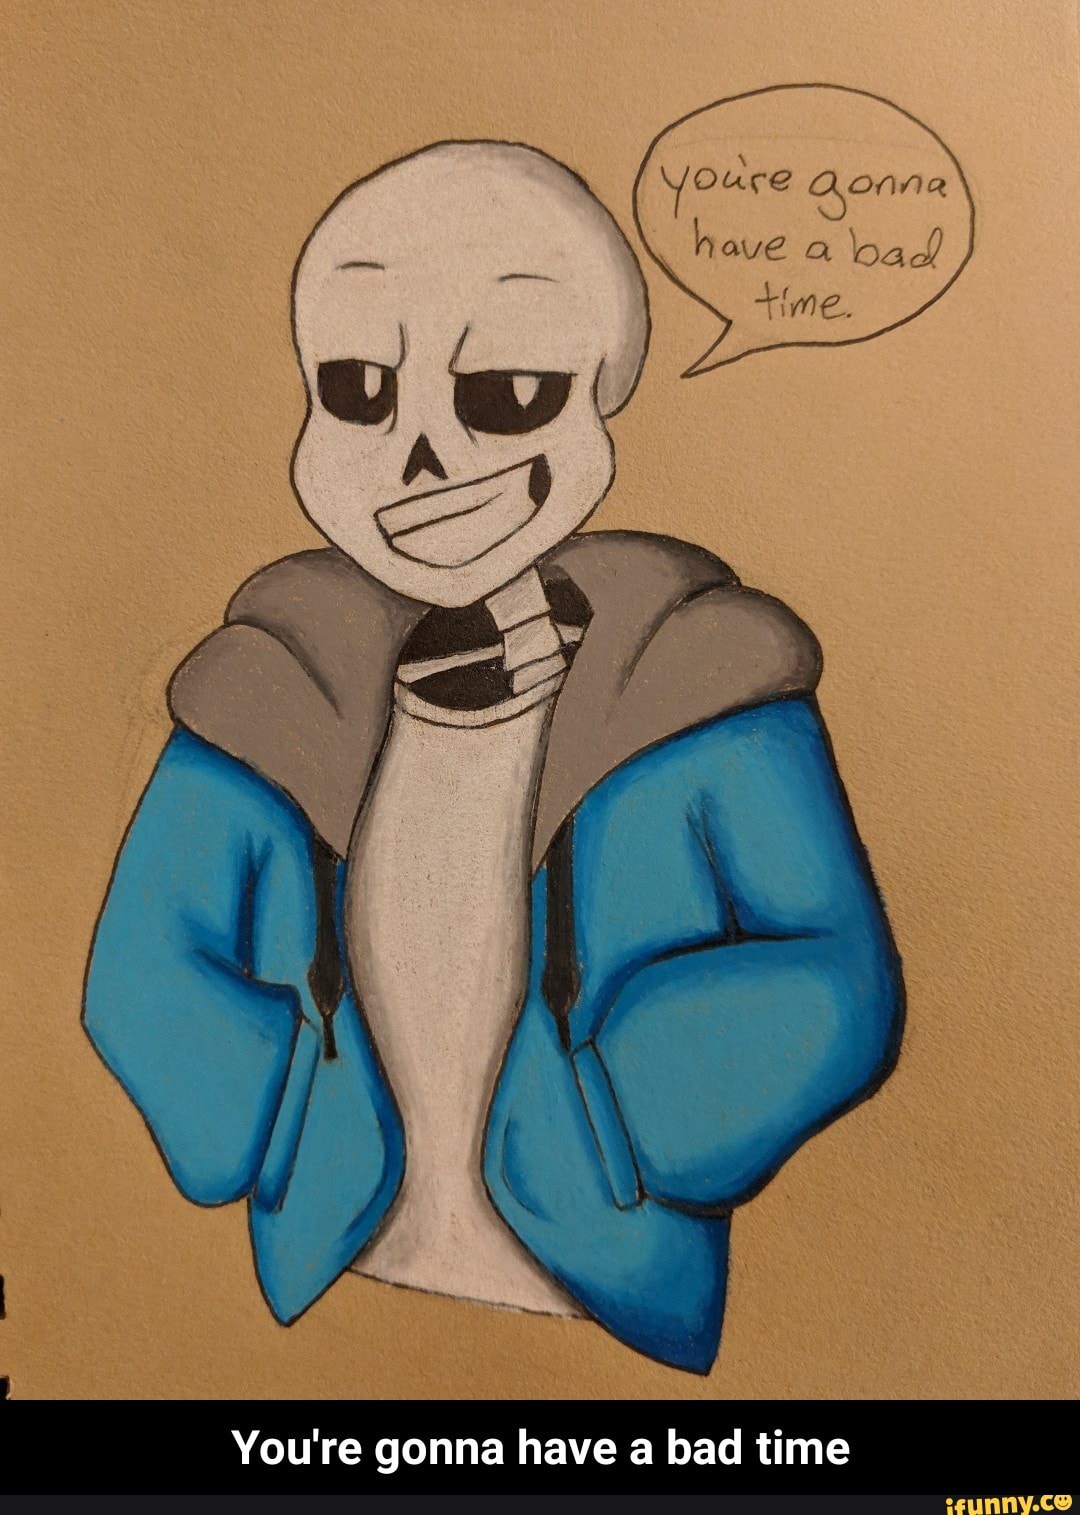 Sans - Undertale - You're gonna have a bad time!